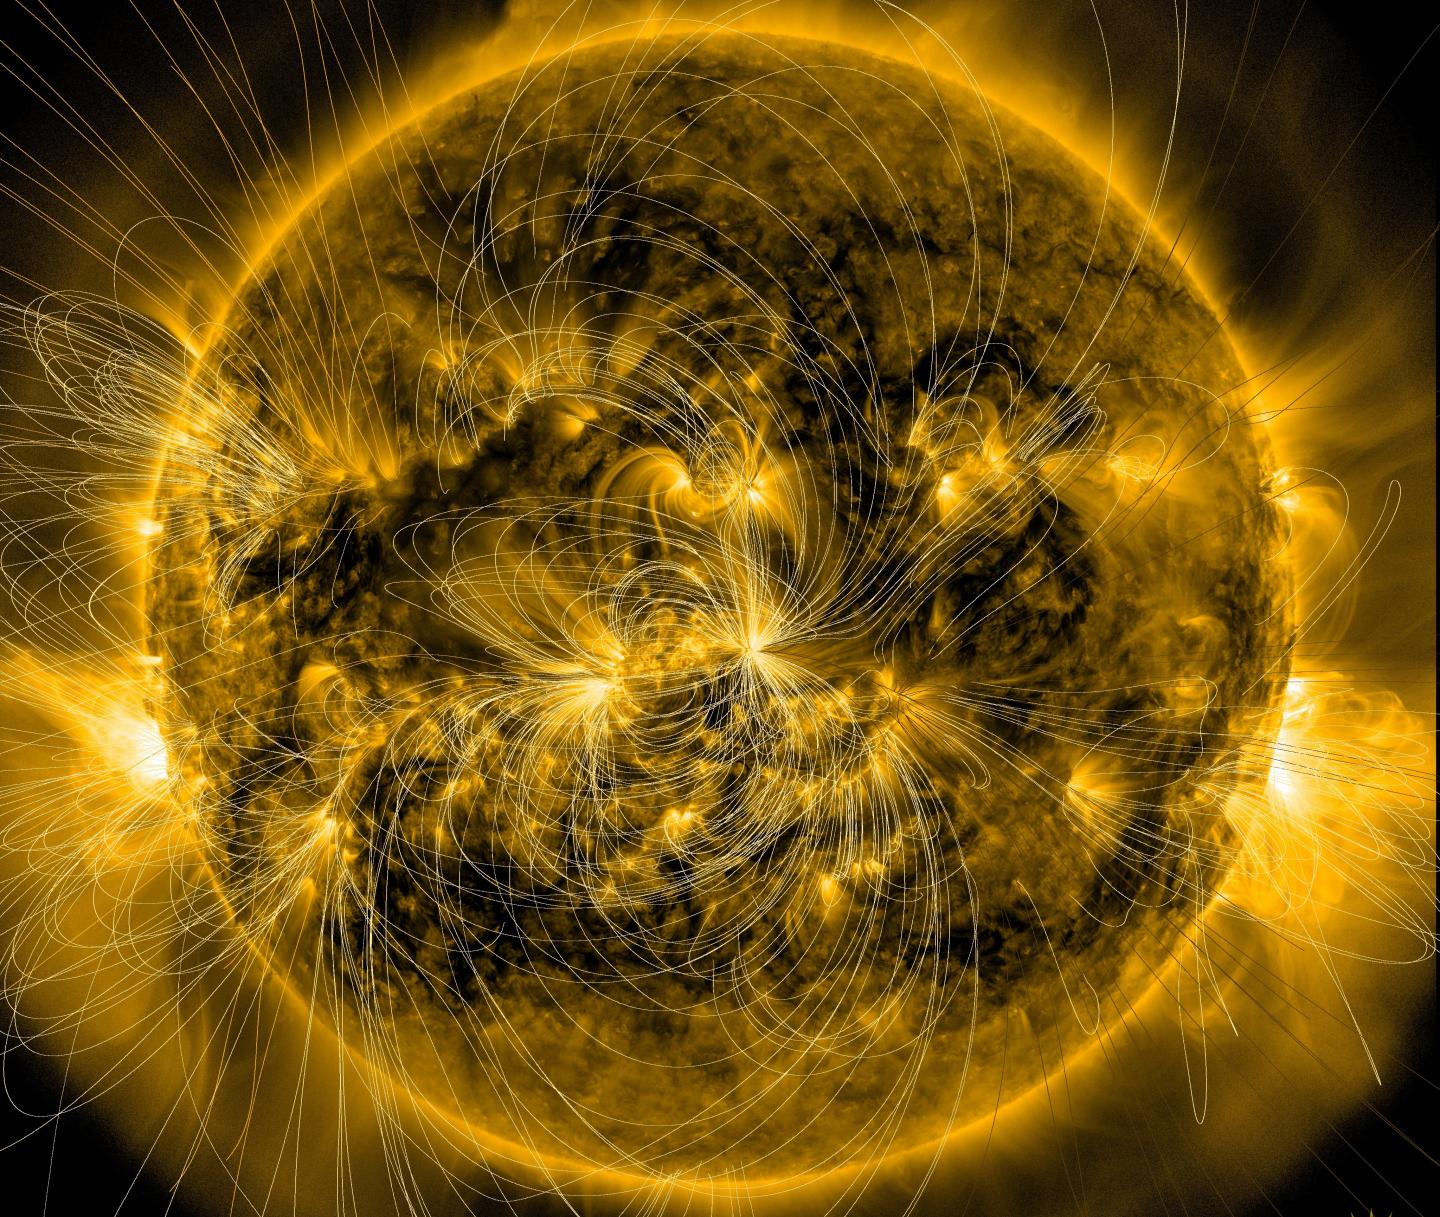 suns magnetic field